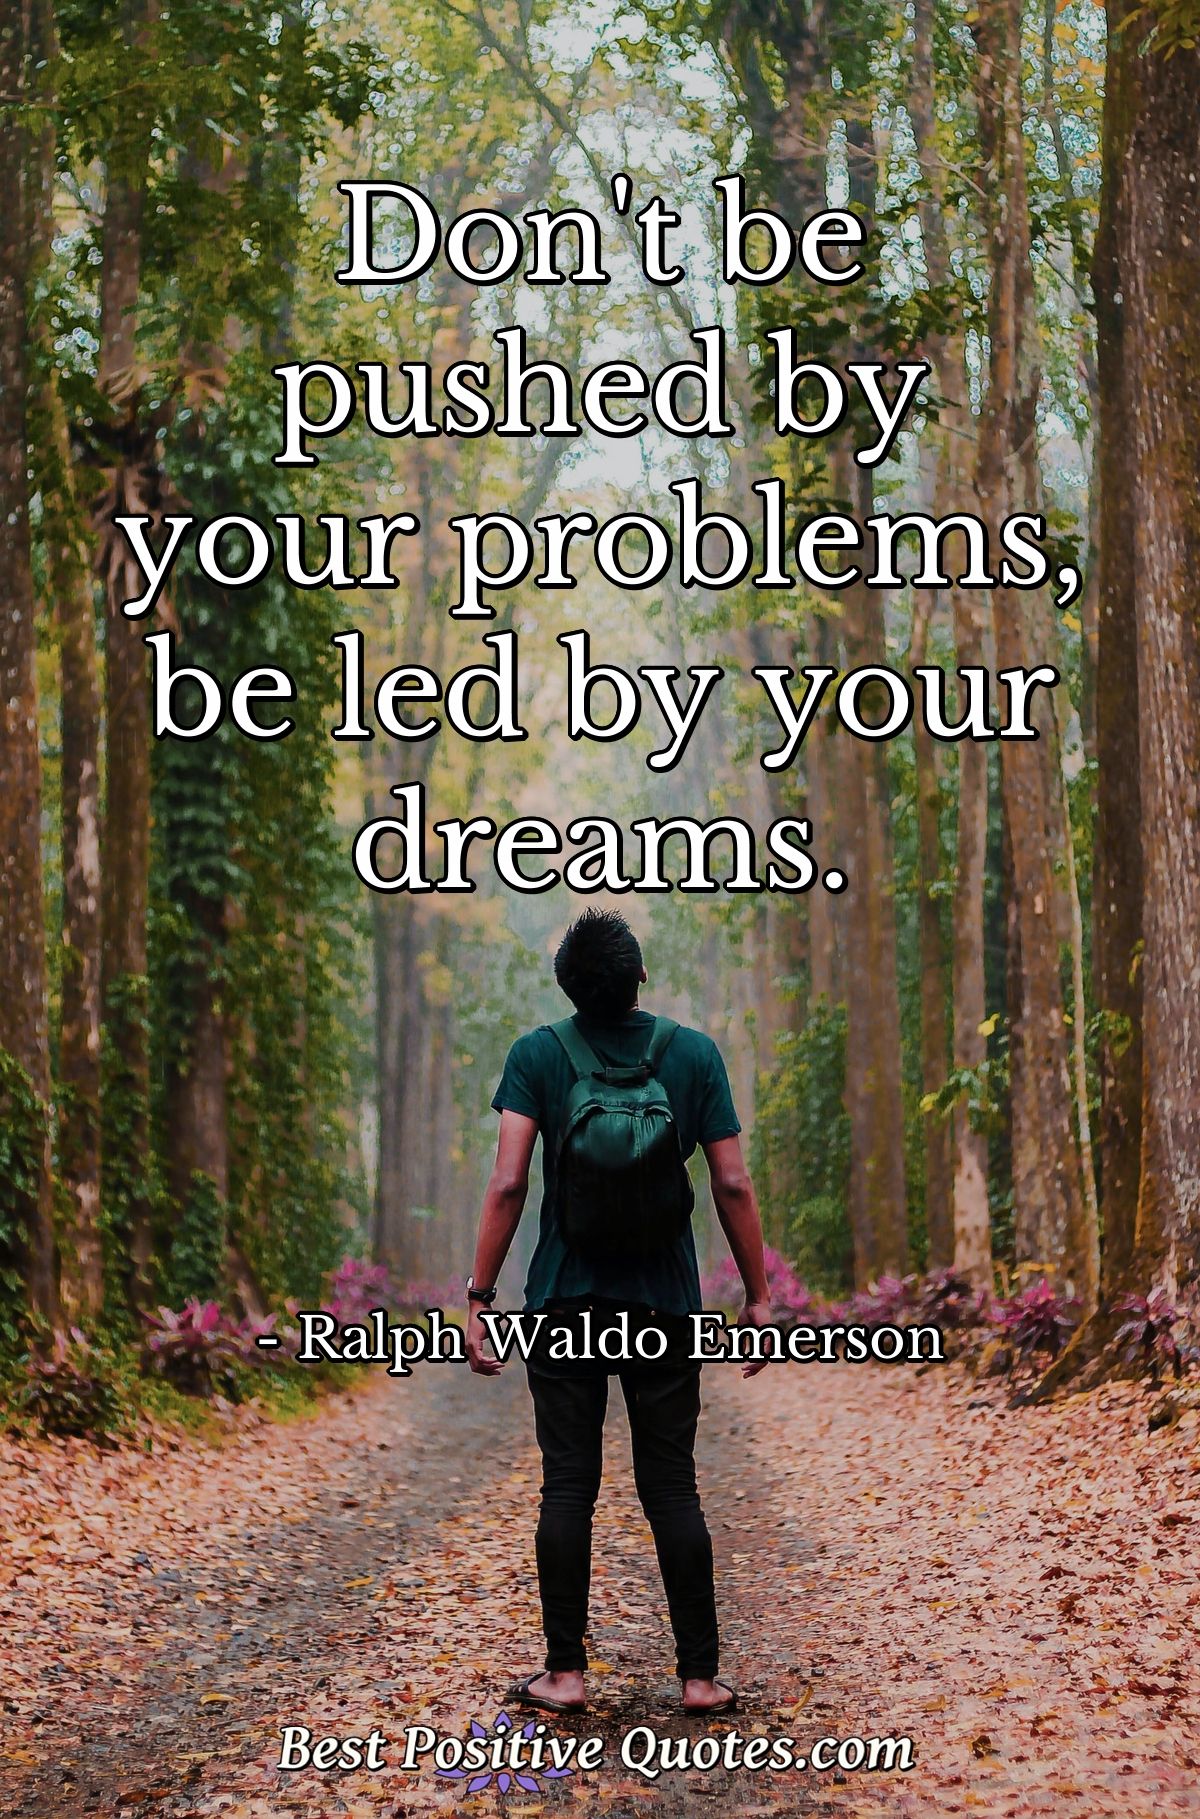 Don't be pushed by your problems, be led by your dreams. - Ralph Waldo Emerson